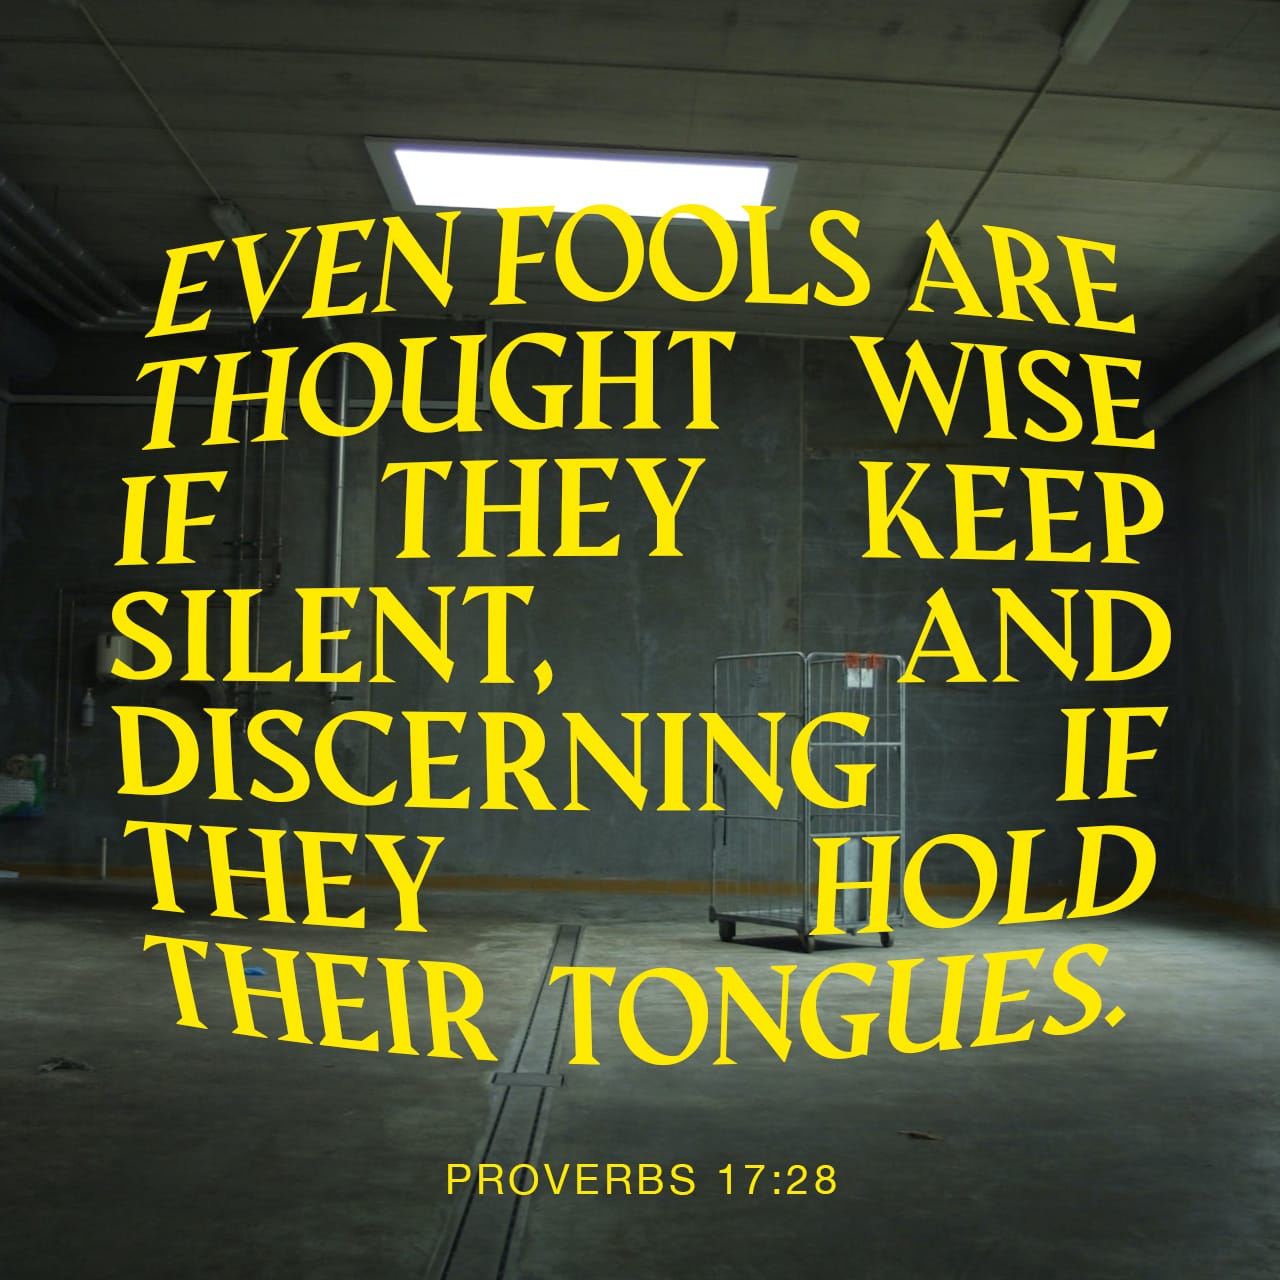 Proverbs 17:27-28 Can you bridle your tongue when your heart is 